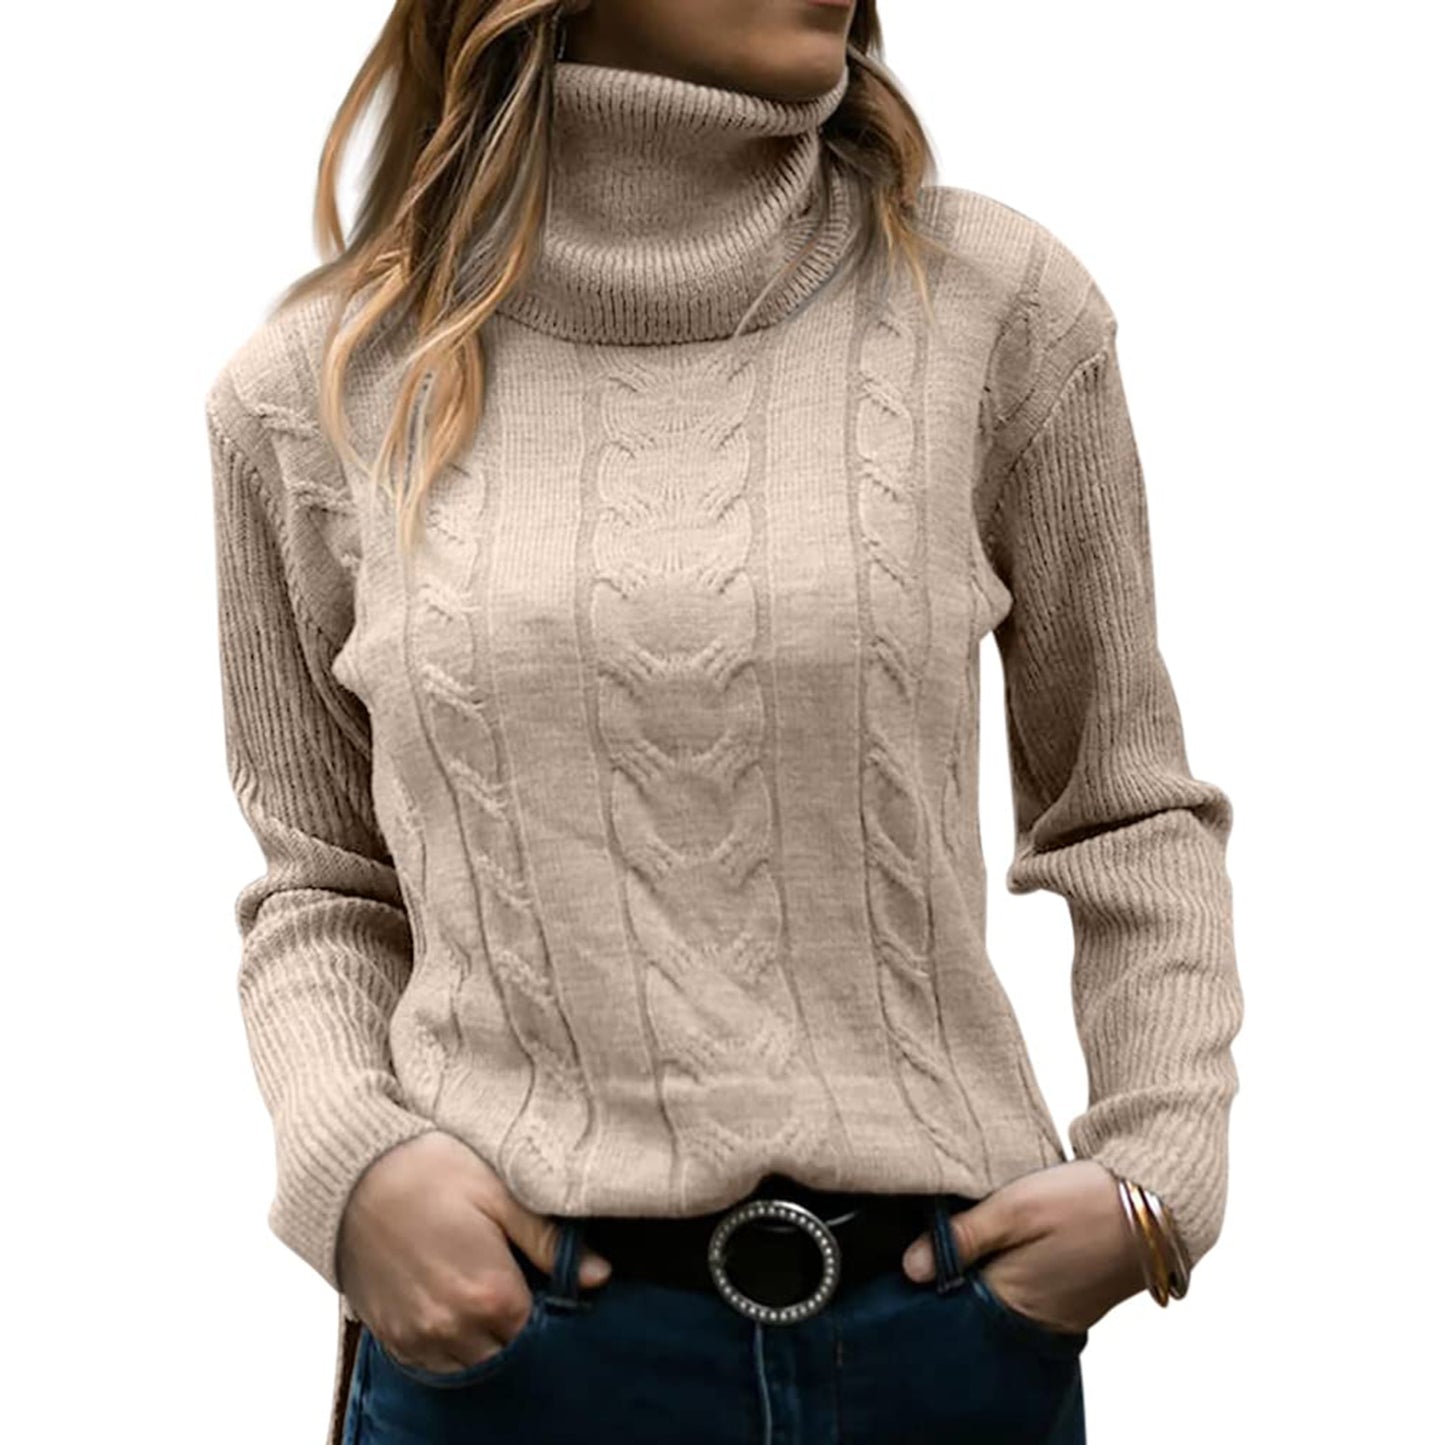 Women's Turtleneck Long Sleeve Cable Knit Sweater